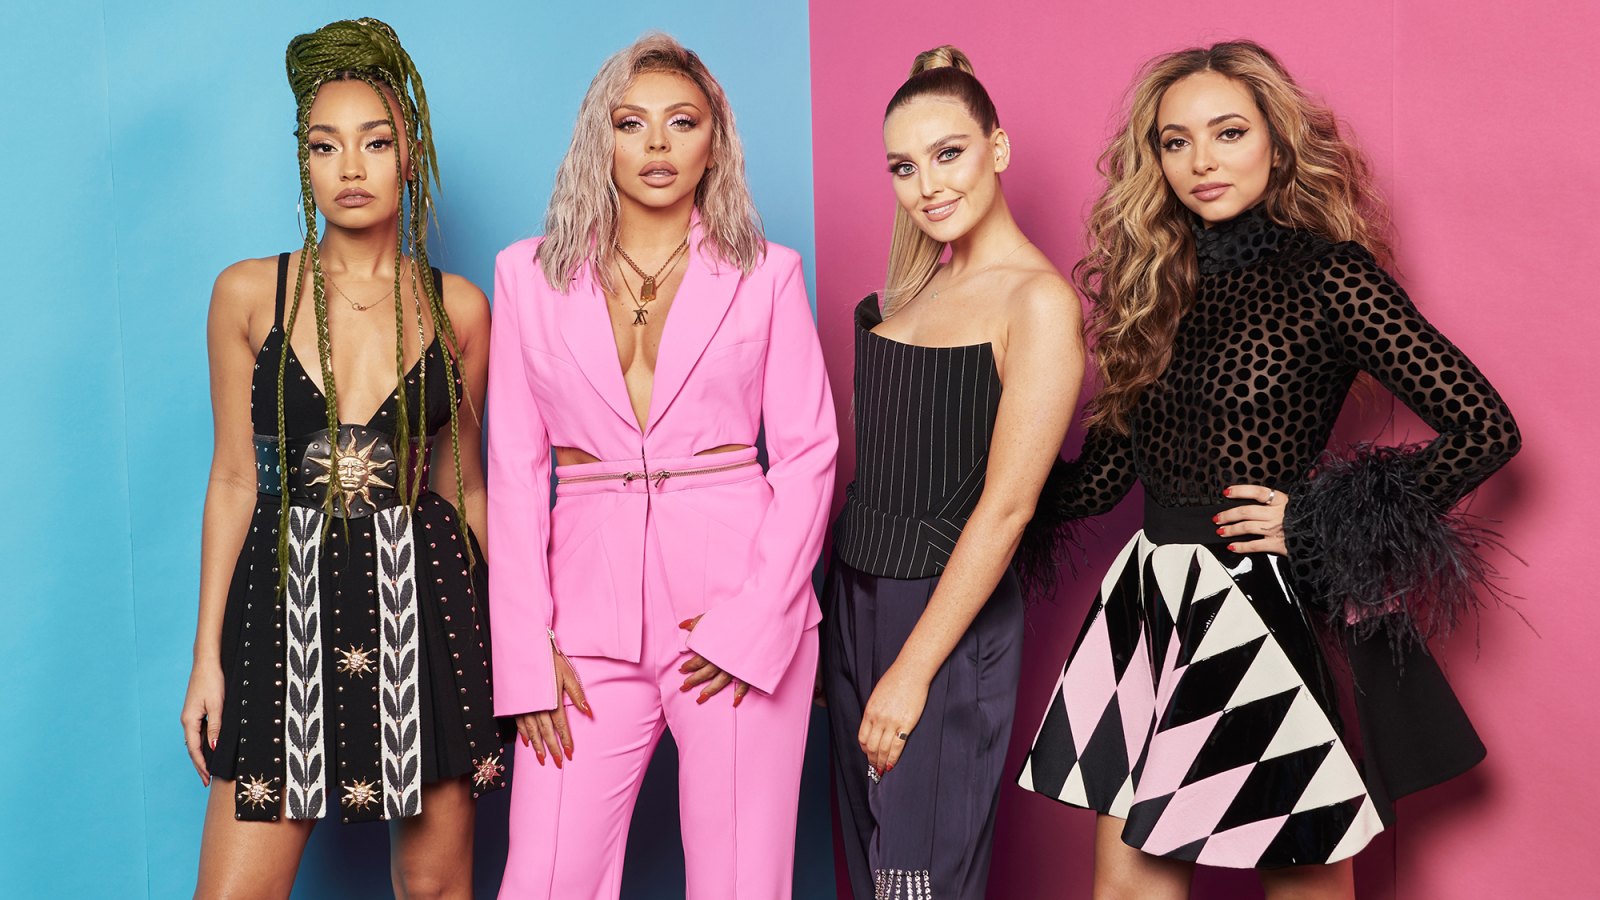 Little Mix’s Jade Thirlwall Breaks Down Why They’re ‘Stronger Than Ever’ With New Album ‘LM5’